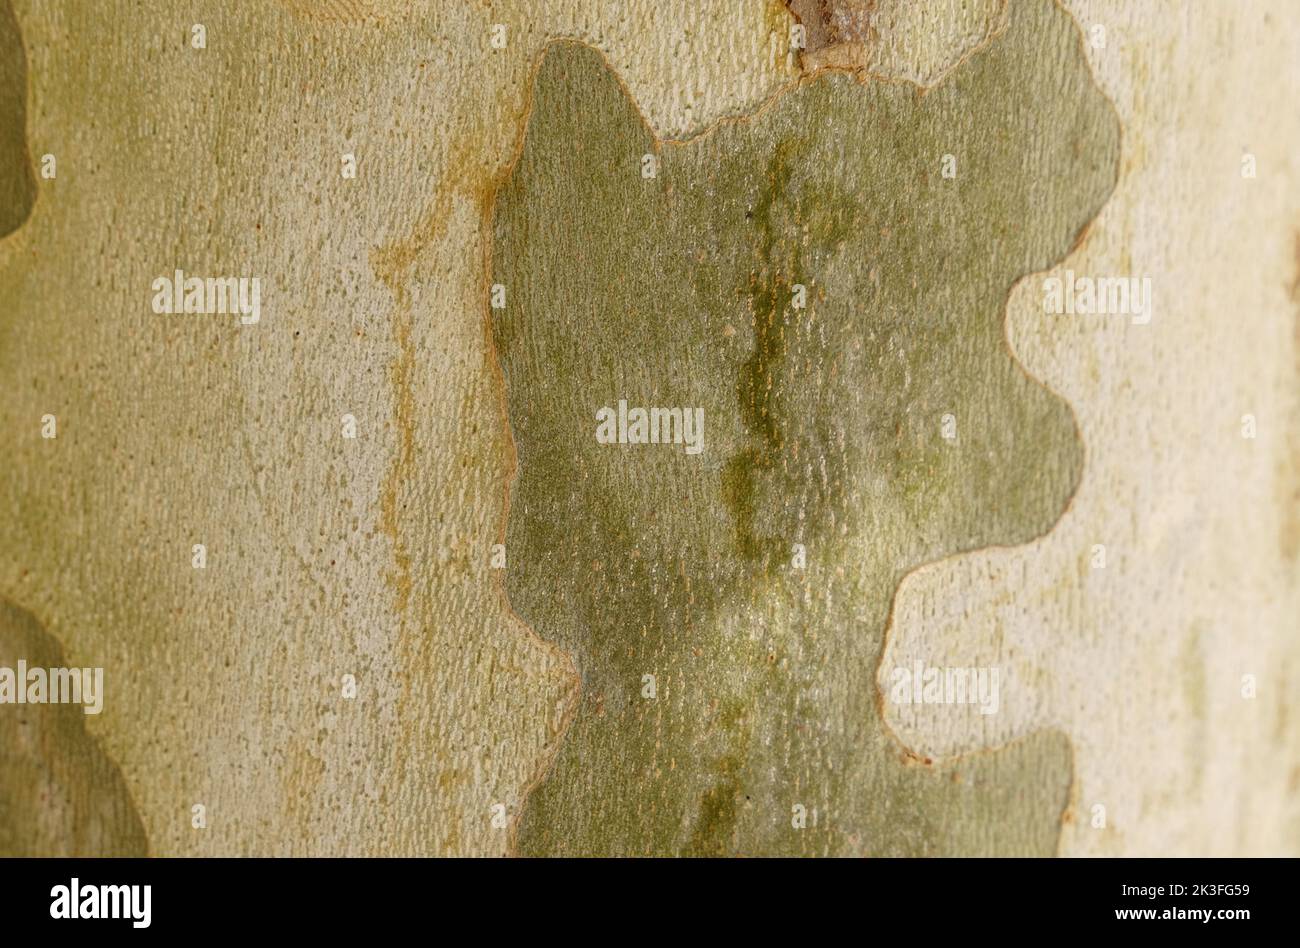 The texture of the bark of a plane tree close-up. Backgrounds and textures Stock Photo